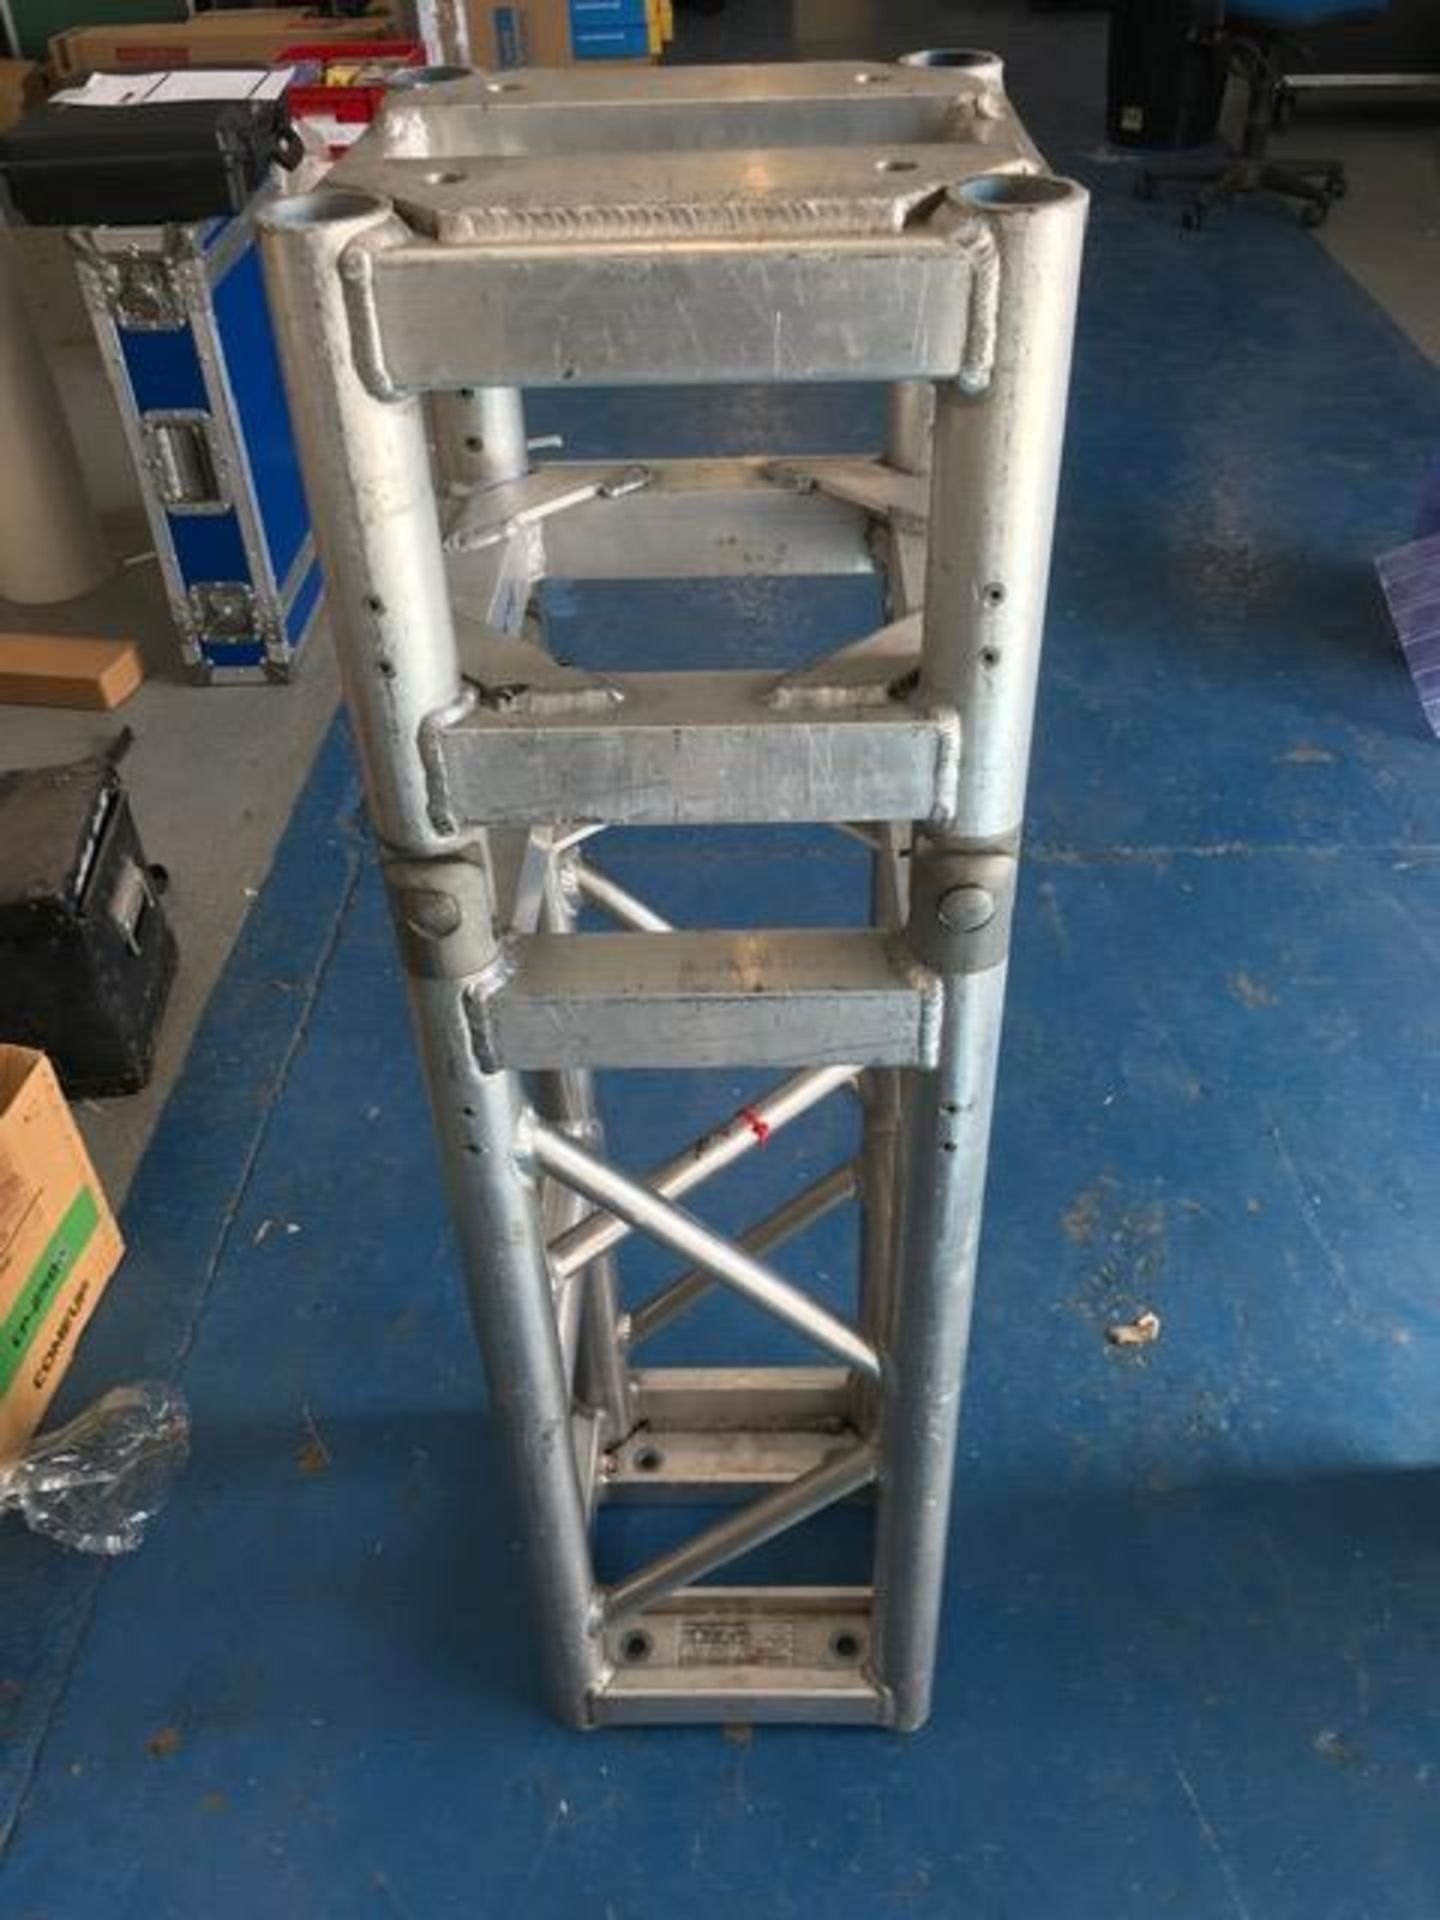 Tomcat 12" Ground Support Hinge Section 44inch - 123237. Ex-Hire, Fair Condition. Serial No: E016419